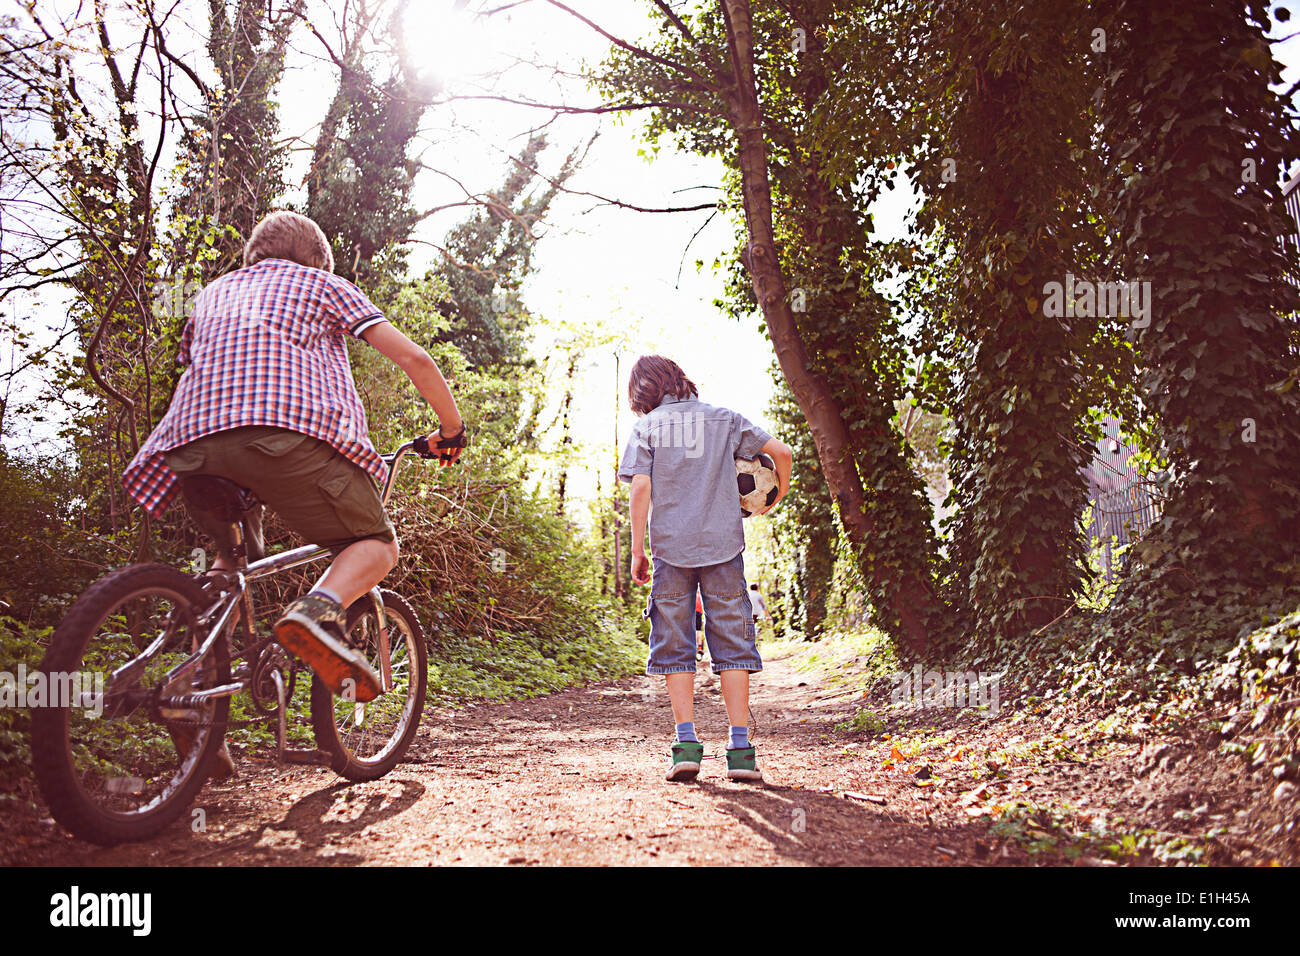 Boy on bike with friend on forest path Stock Photo